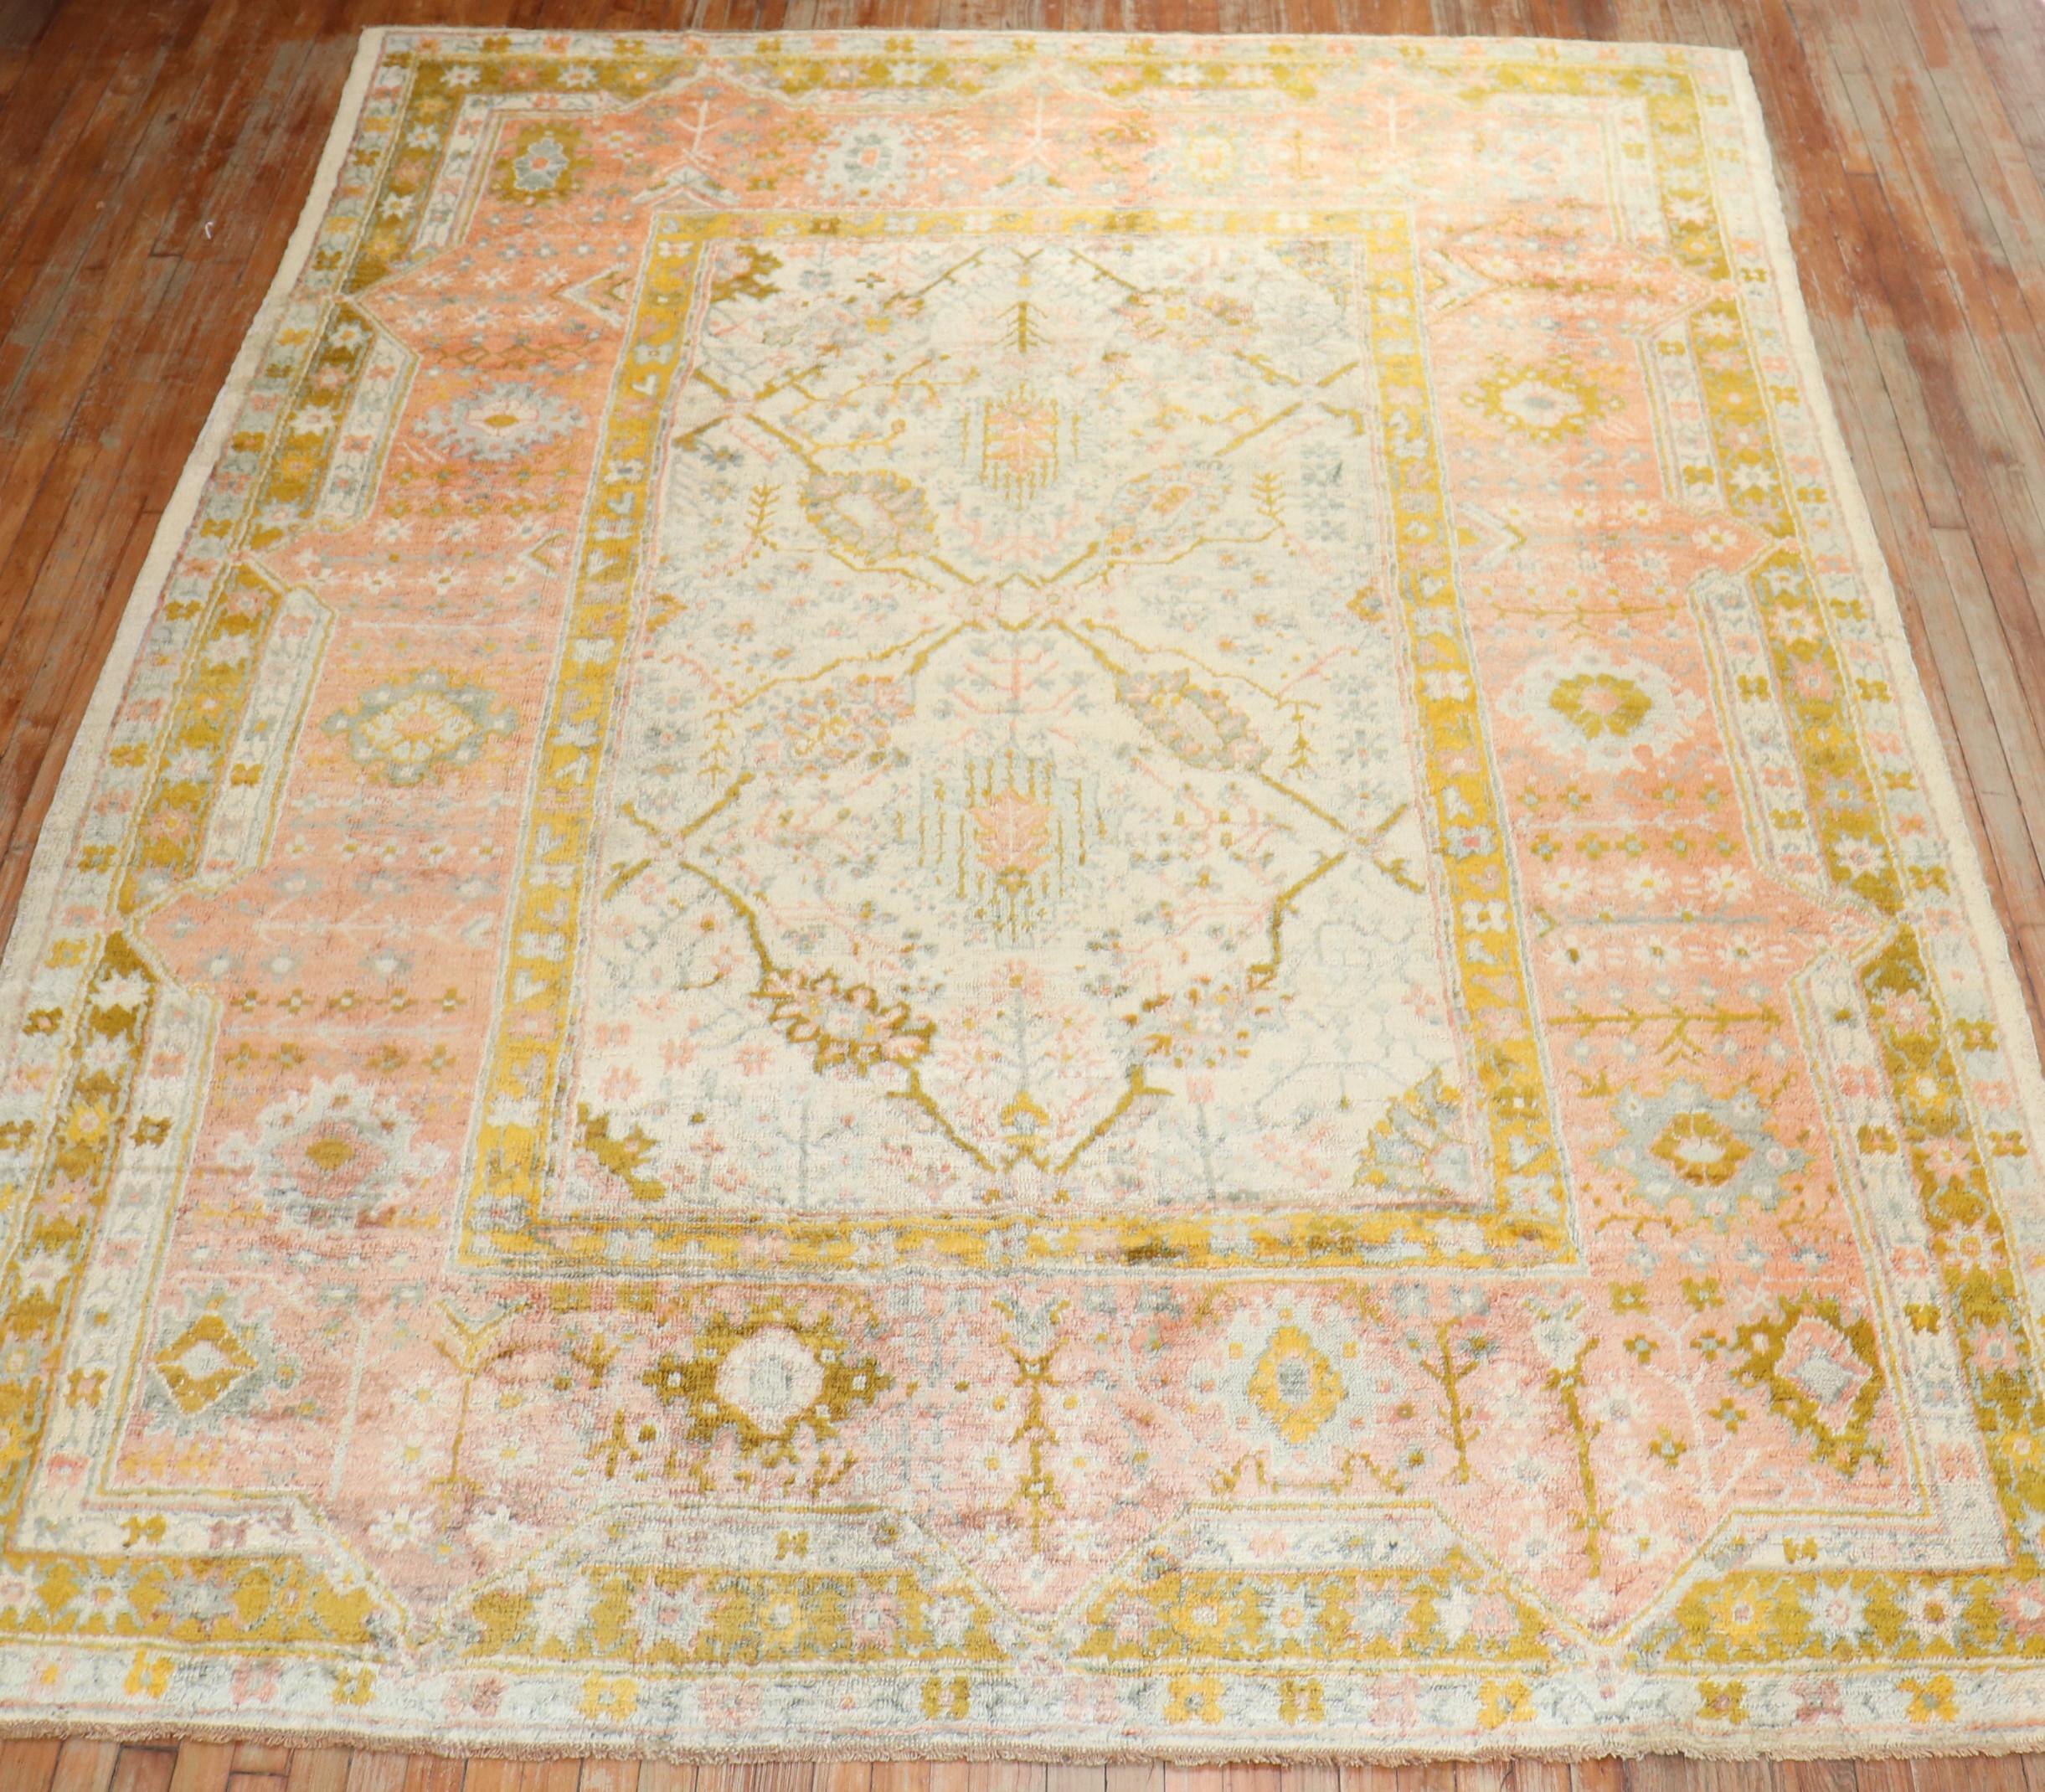 A circa 1900 authentic Angora Wool Overall Very Good Condition room size Turkish Oushak Rug with an all-over design with accent colors in goldenrod, pink and green on an ivory ground. The rug has a silky sheen to it

Measures: 8'5'' x